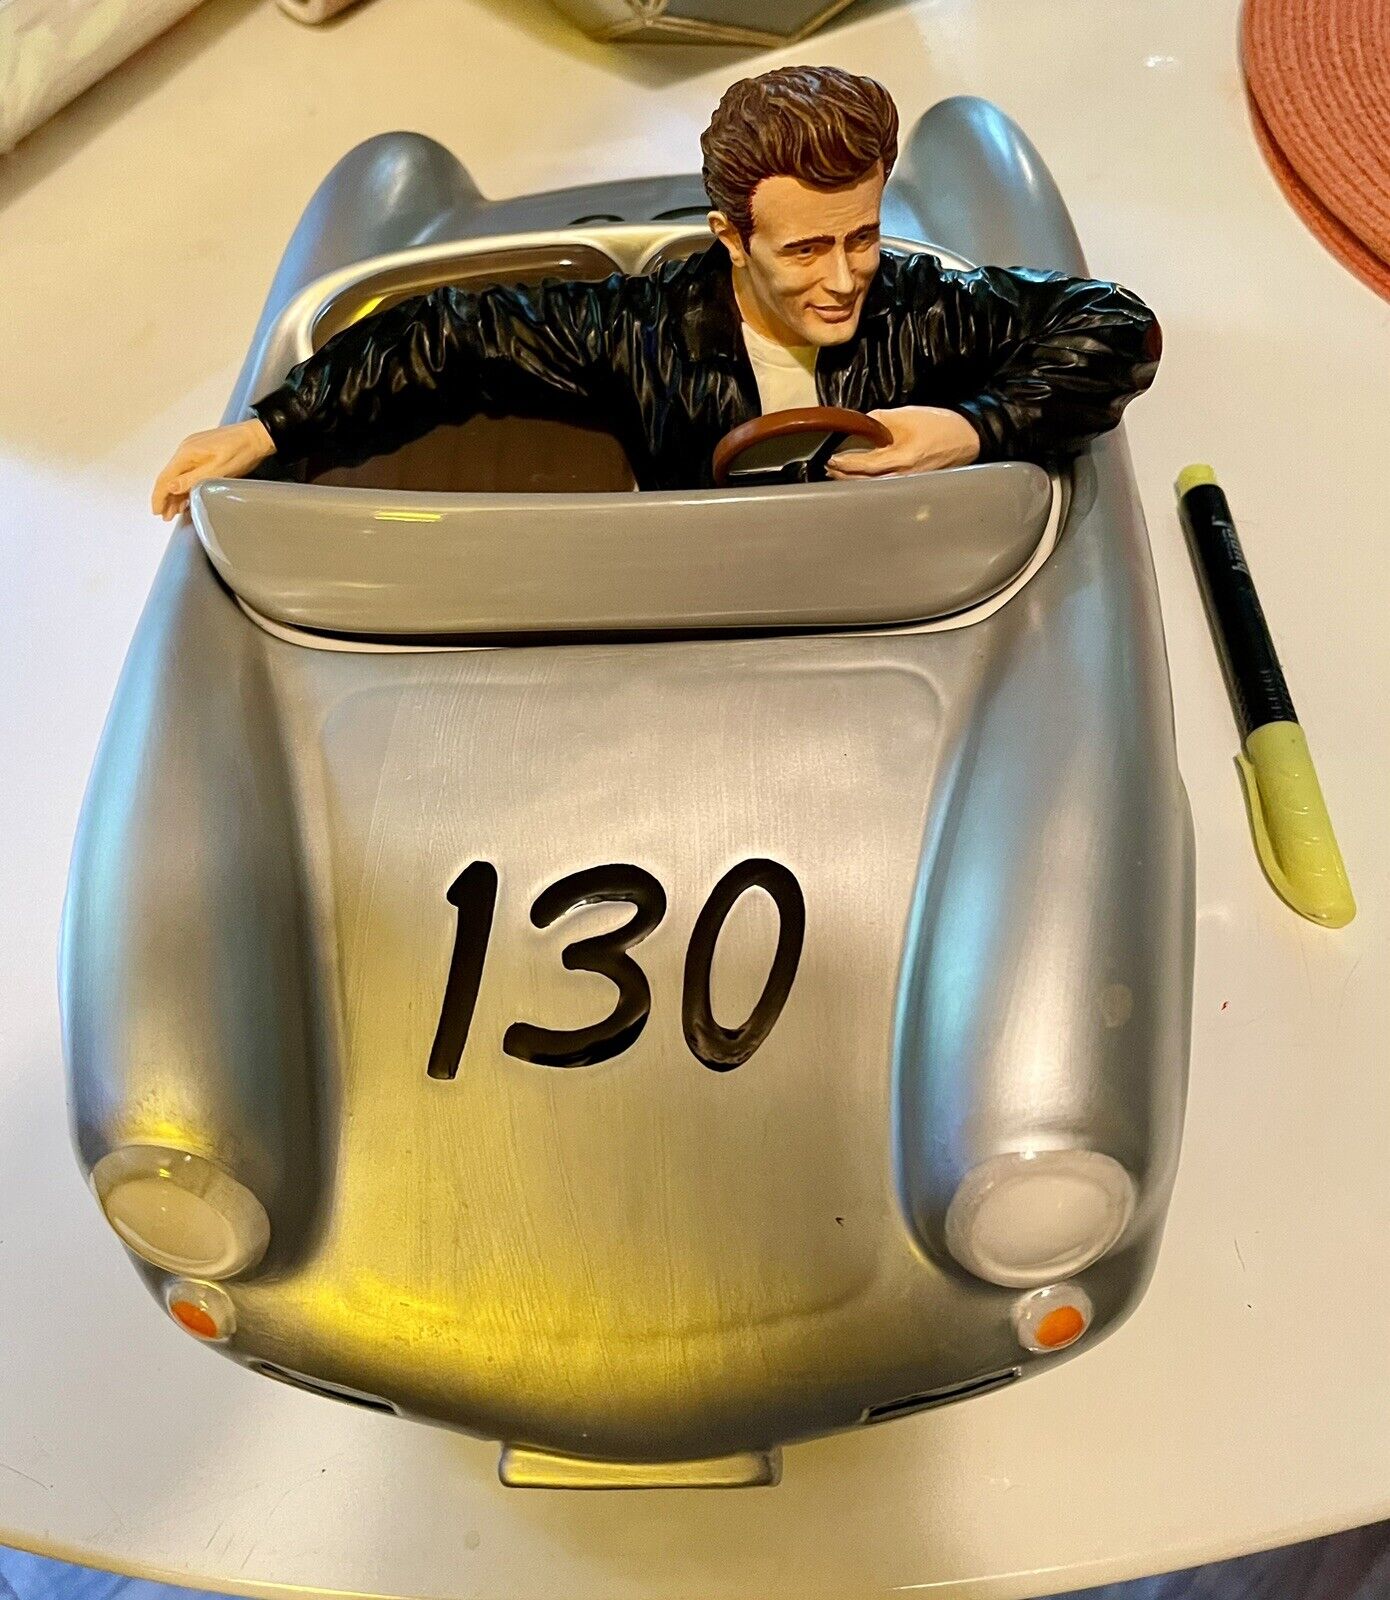 EXTREMELY RARE Ltd. Edition Vandor James Dean Cookie Jar, No. 747 of Only 2,400